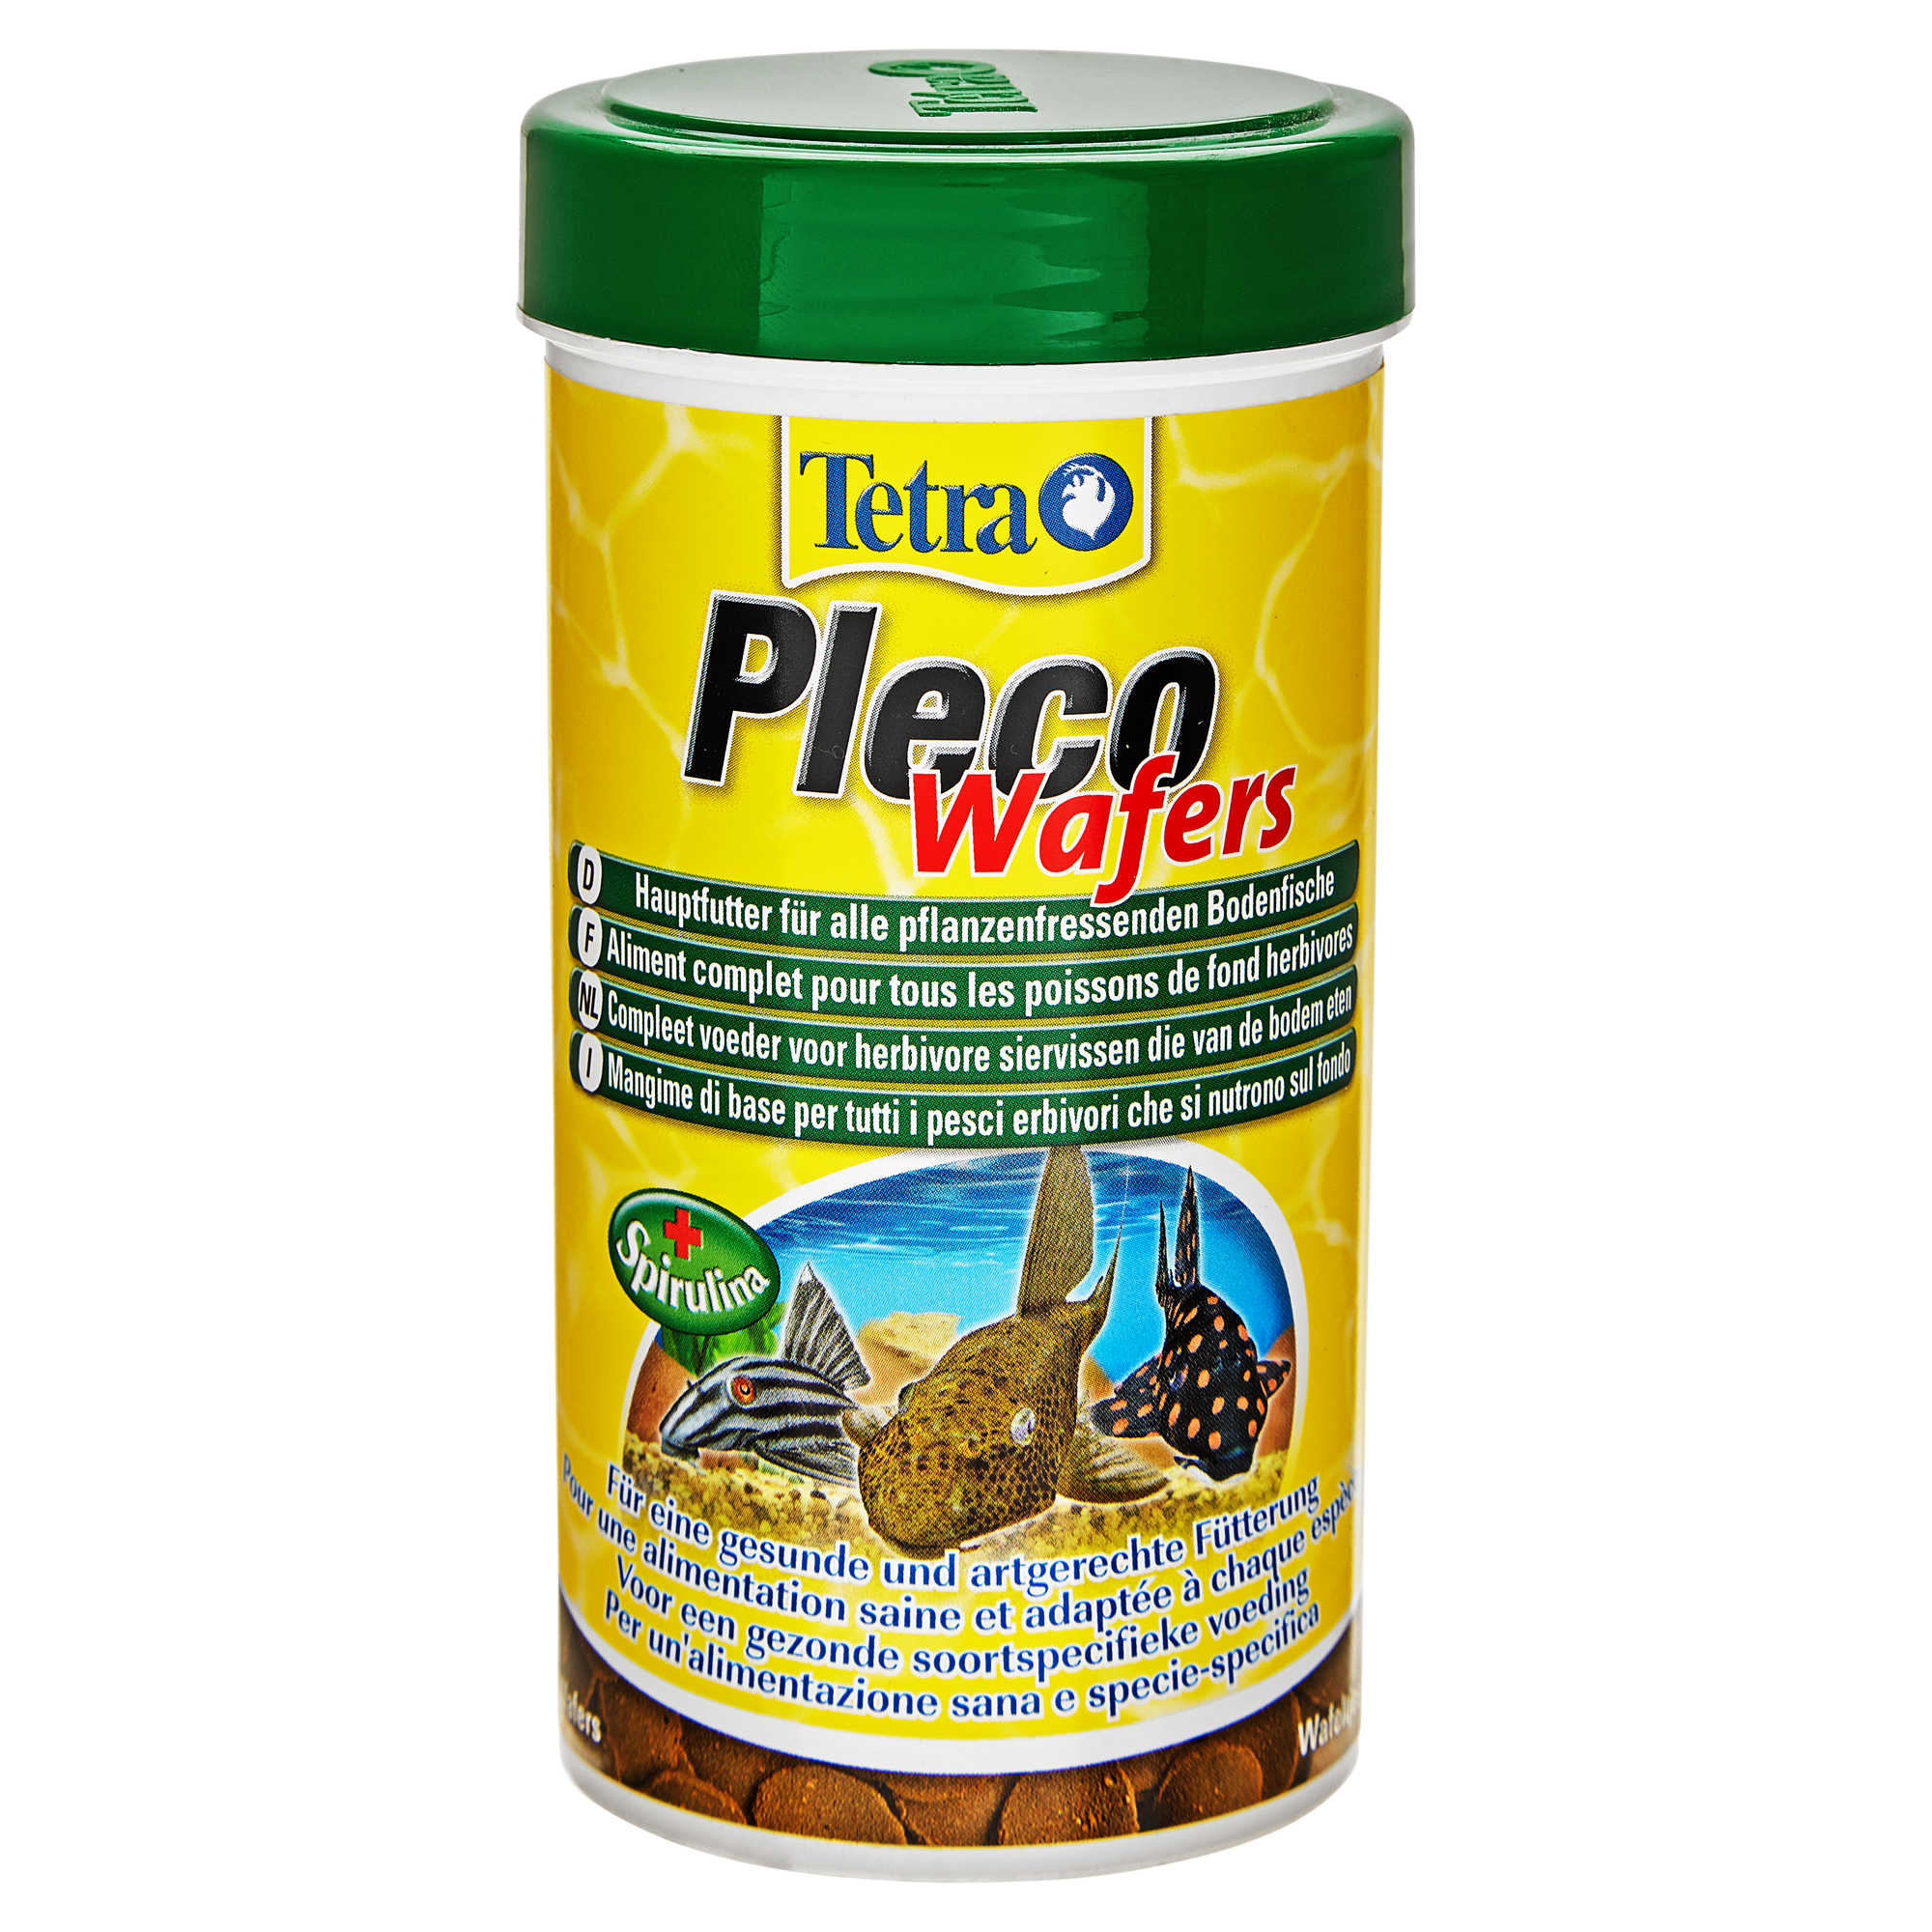 Fischfutter "Pleco" Wafers 250 ml + product picture